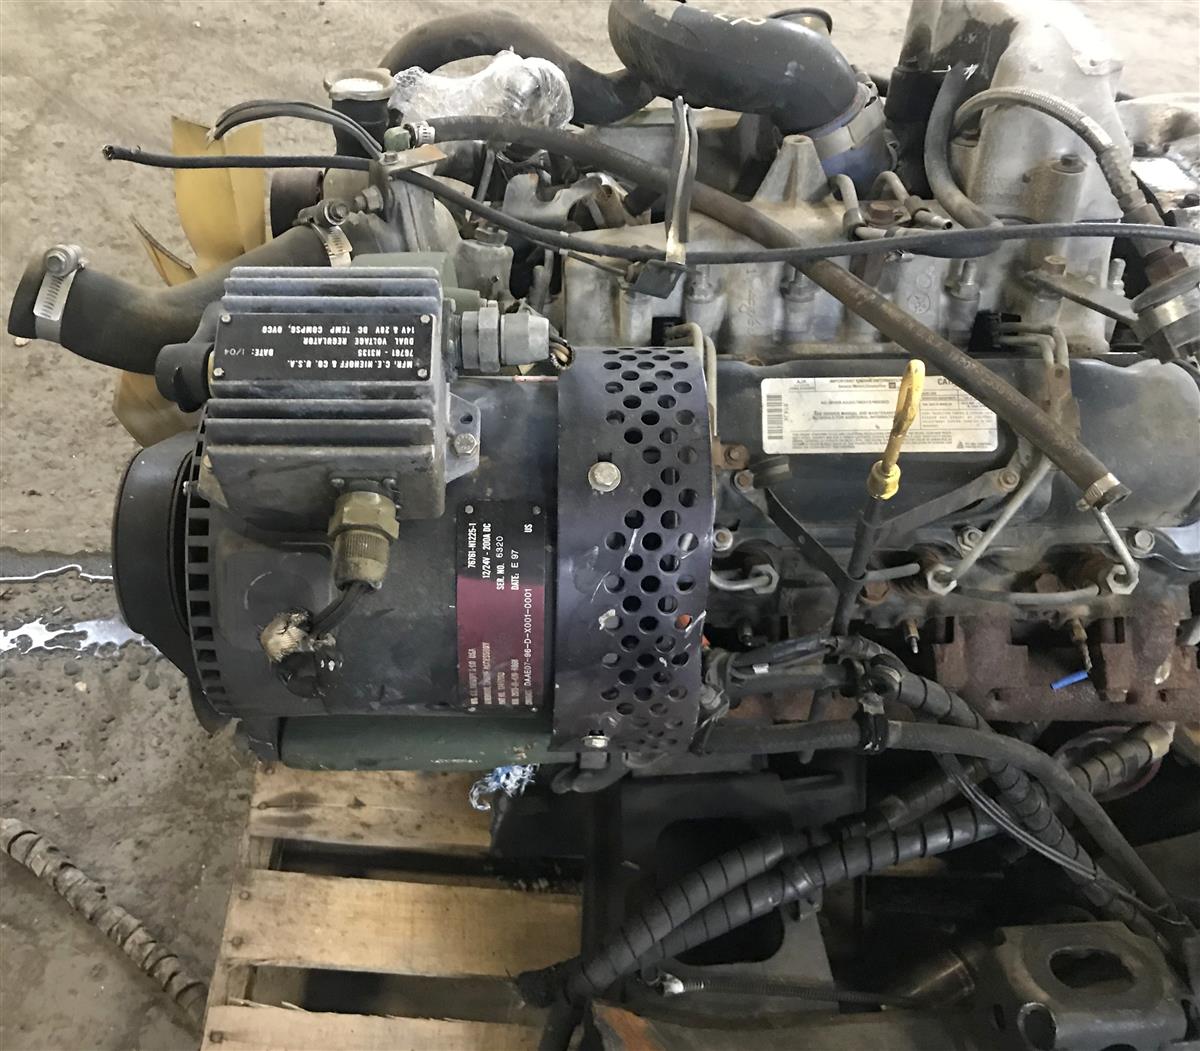 HM-1239 | HM-1239  6.5 Liter Engine with 4 Speed Transmission and Transfer Case (Turbo) (16).JPG